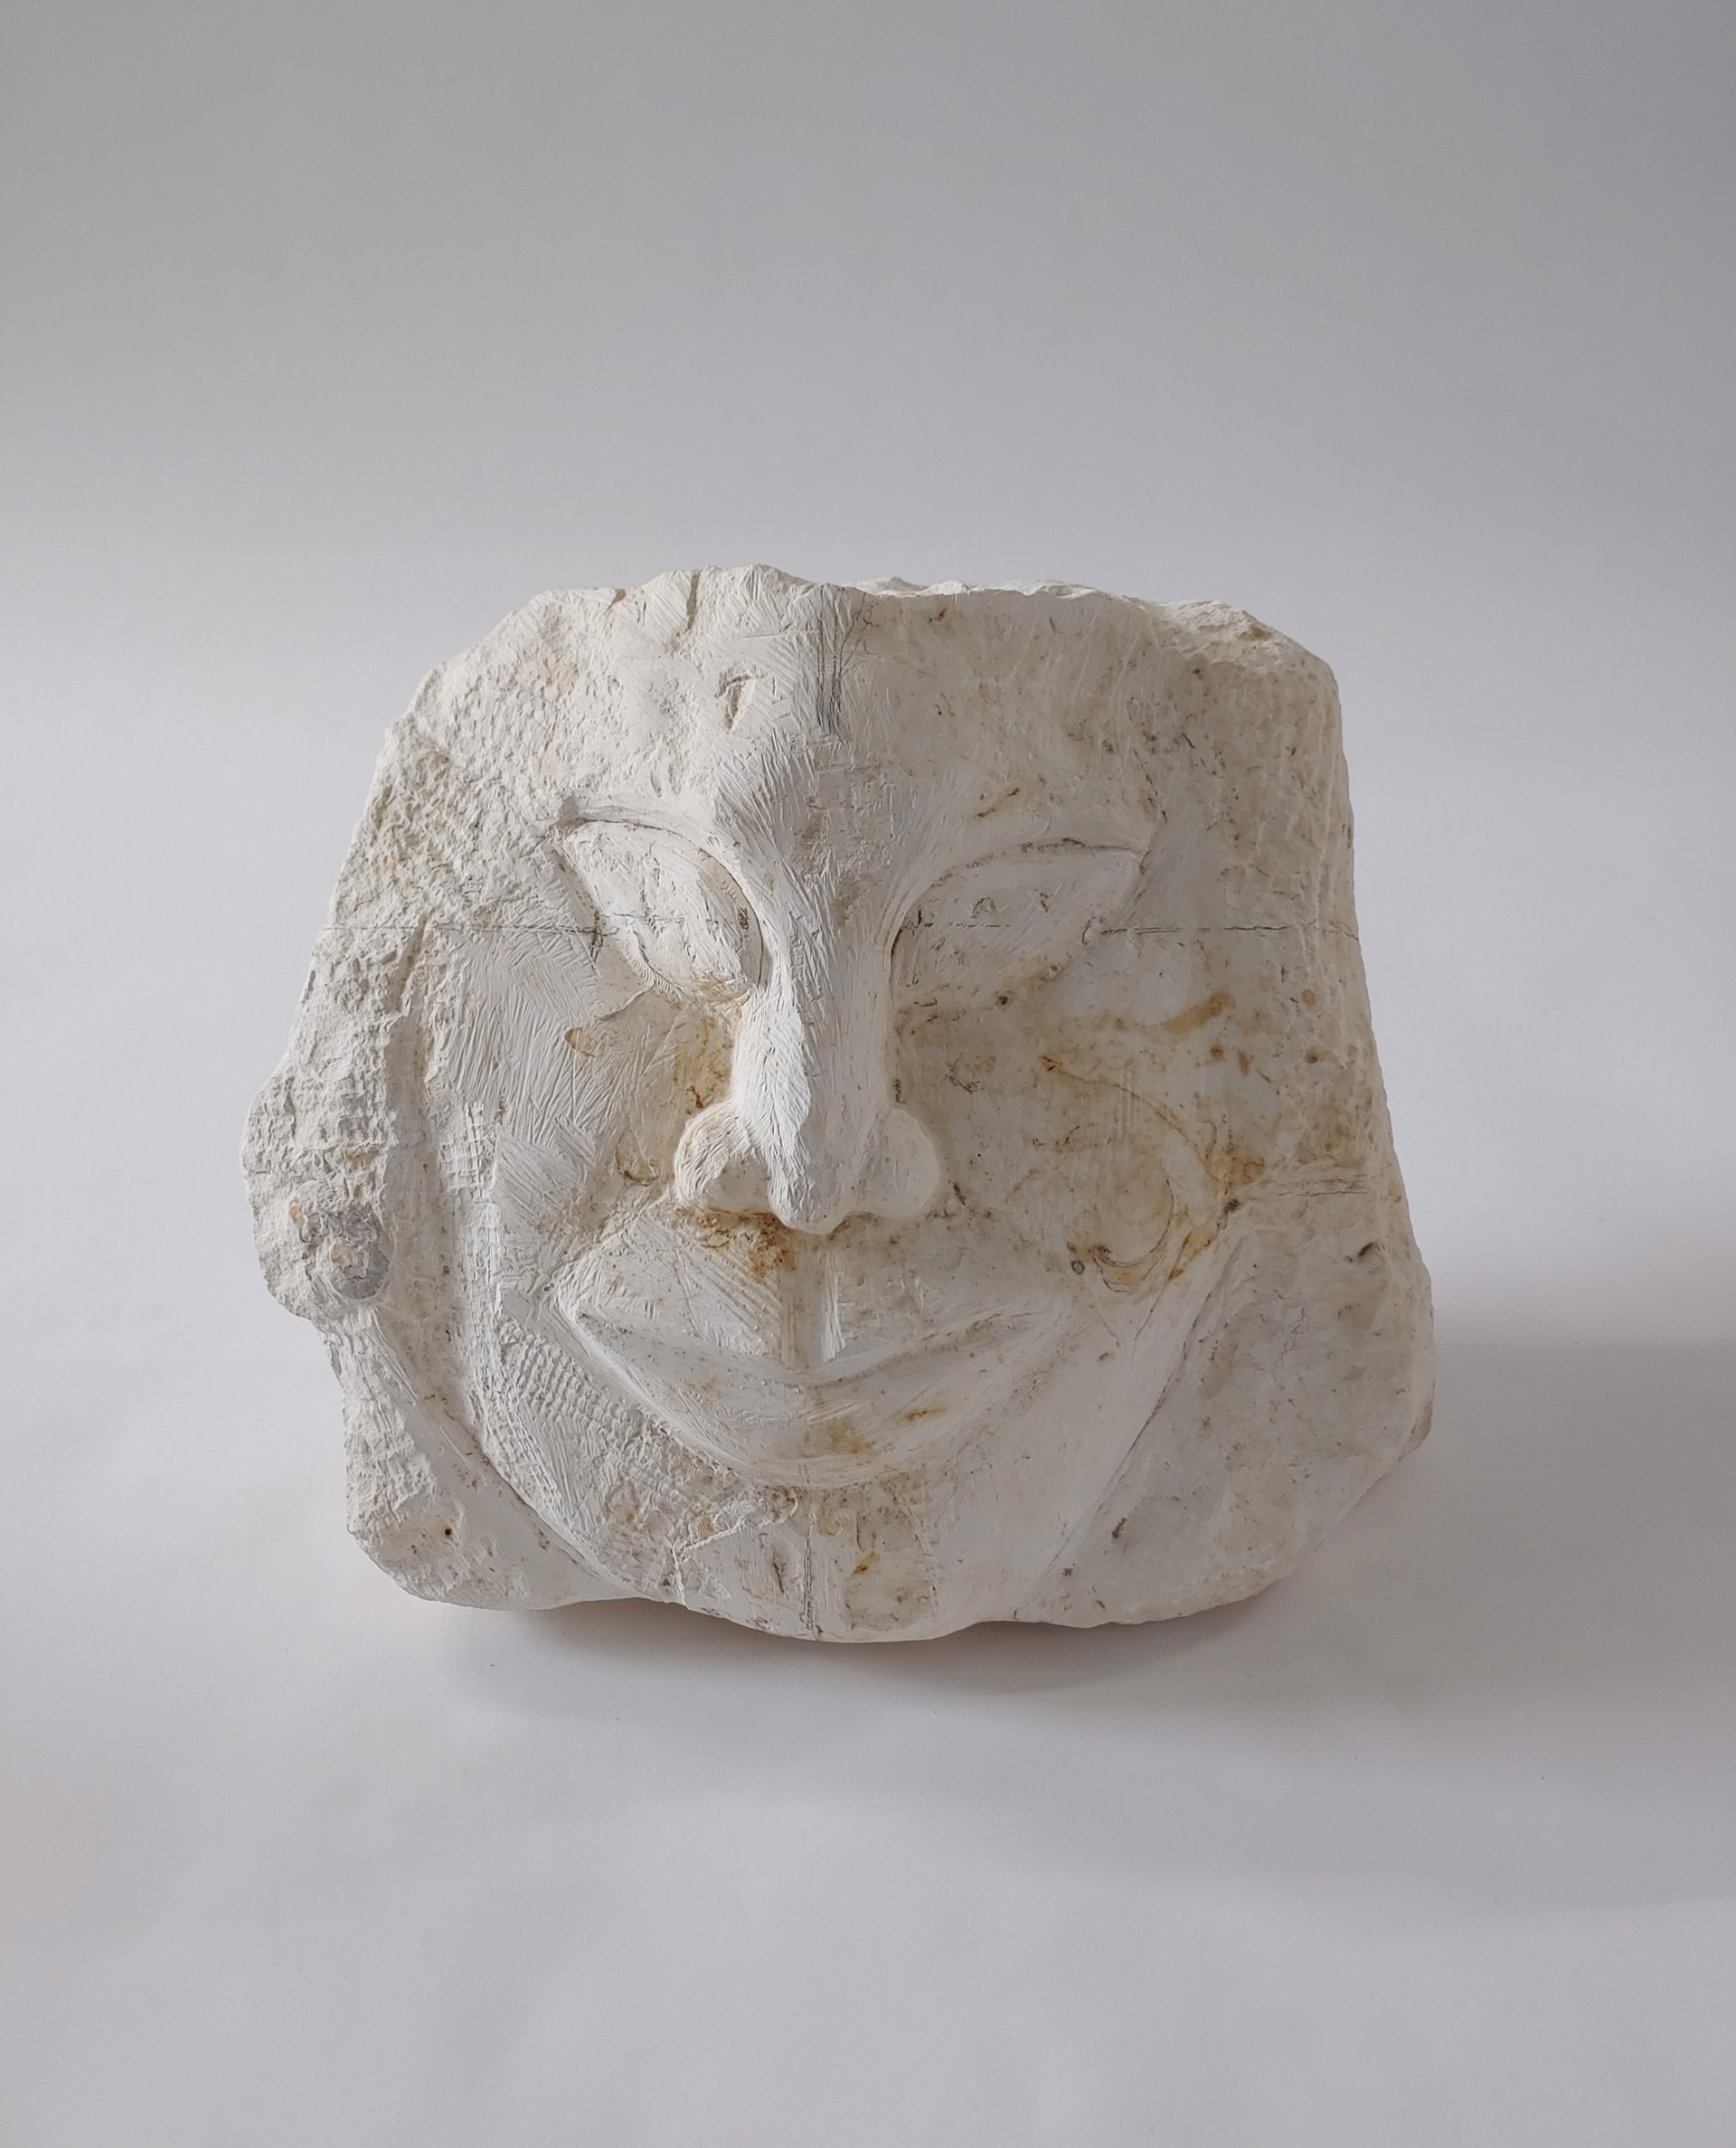 Face - Stone Sculpture, unfinished by David Amdur